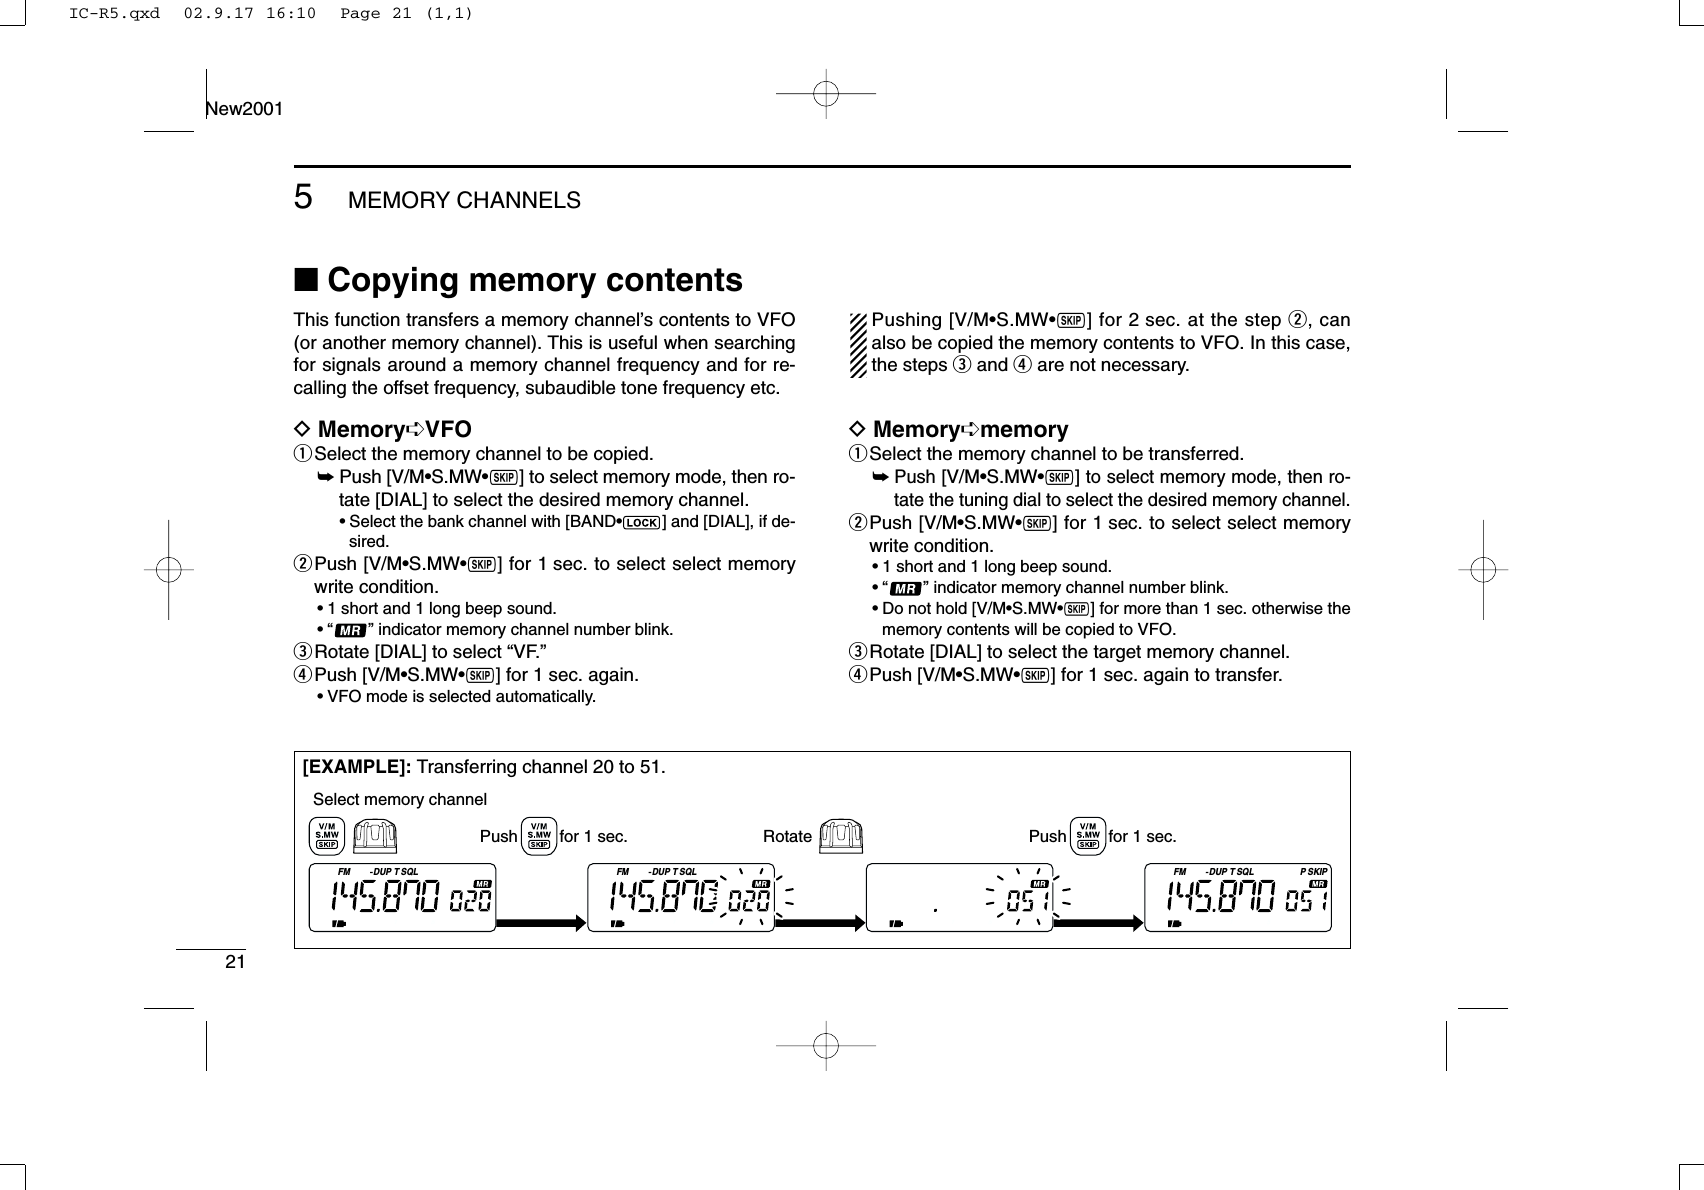 215MEMORY CHANNELSNew2001■Copying memory contentsThis function transfers a memory channel’s contents to VFO(or another memory channel). This is useful when searchingfor signals around a memory channel frequency and for re-calling the offset frequency, subaudible tone frequency etc.DMemory➪VFOqSelect the memory channel to be copied.➥Push [V/M•S.MW•~] to select memory mode, then ro-tate [DIAL] to select the desired memory channel.•Select the bank channel with [BAND•] and [DIAL], if de-sired.wPush [V/M•S.MW•~] for 1 sec. to select select memorywrite condition.•1 short and 1 long beep sound.•“ ” indicator memory channel number blink.eRotate [DIAL] to select “VF.” rPush [V/M•S.MW•~] for 1 sec. again.•VFO mode is selected automatically.Pushing [V/M•S.MW•~] for 2 sec. at the step w, canalso be copied the memory contents to VFO. In this case,the steps eand rare not necessary.DMemory➪memoryqSelect the memory channel to be transferred.➥Push [V/M•S.MW•~] to select memory mode, then ro-tate the tuning dial to select the desired memory channel.wPush [V/M•S.MW•~] for 1 sec. to select select memorywrite condition.•1 short and 1 long beep sound.•“ ” indicator memory channel number blink.•Do not hold [V/M•S.MW•~] for more than 1 sec. otherwise thememory contents will be copied to VFO.eRotate [DIAL] to select the target memory channel.rPush [V/M•S.MW•~] for 1 sec. again to transfer.[EXAMPLE]: Transferring channel 20 to 51.FM DUP SQLTFM DUP SQLTFM DUP SQL SKIPTPPush         for 1 sec. RotateSelect memory channelPush         for 1 sec.IC-R5.qxd  02.9.17 16:10  Page 21 (1,1)